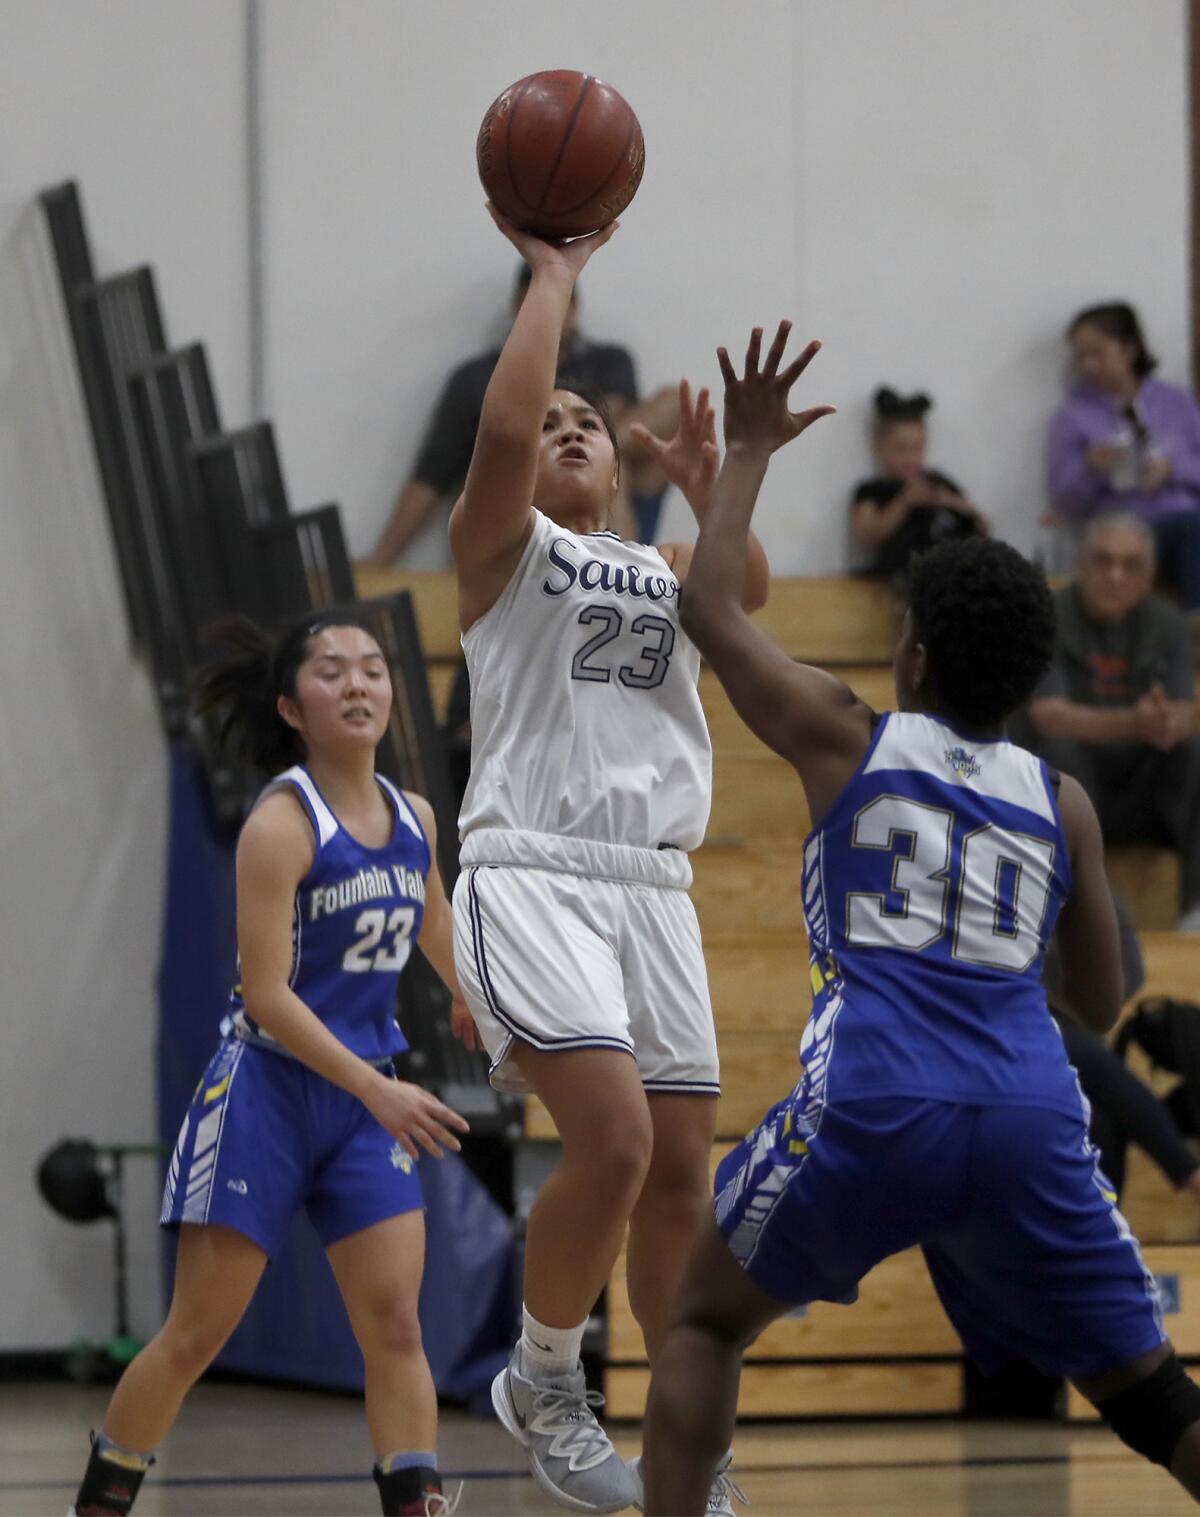 Newport Harbor's Cydney Jover (23) scores against Fountain Valley during a Wave League game on Saturday, Jan. 18, 2020.